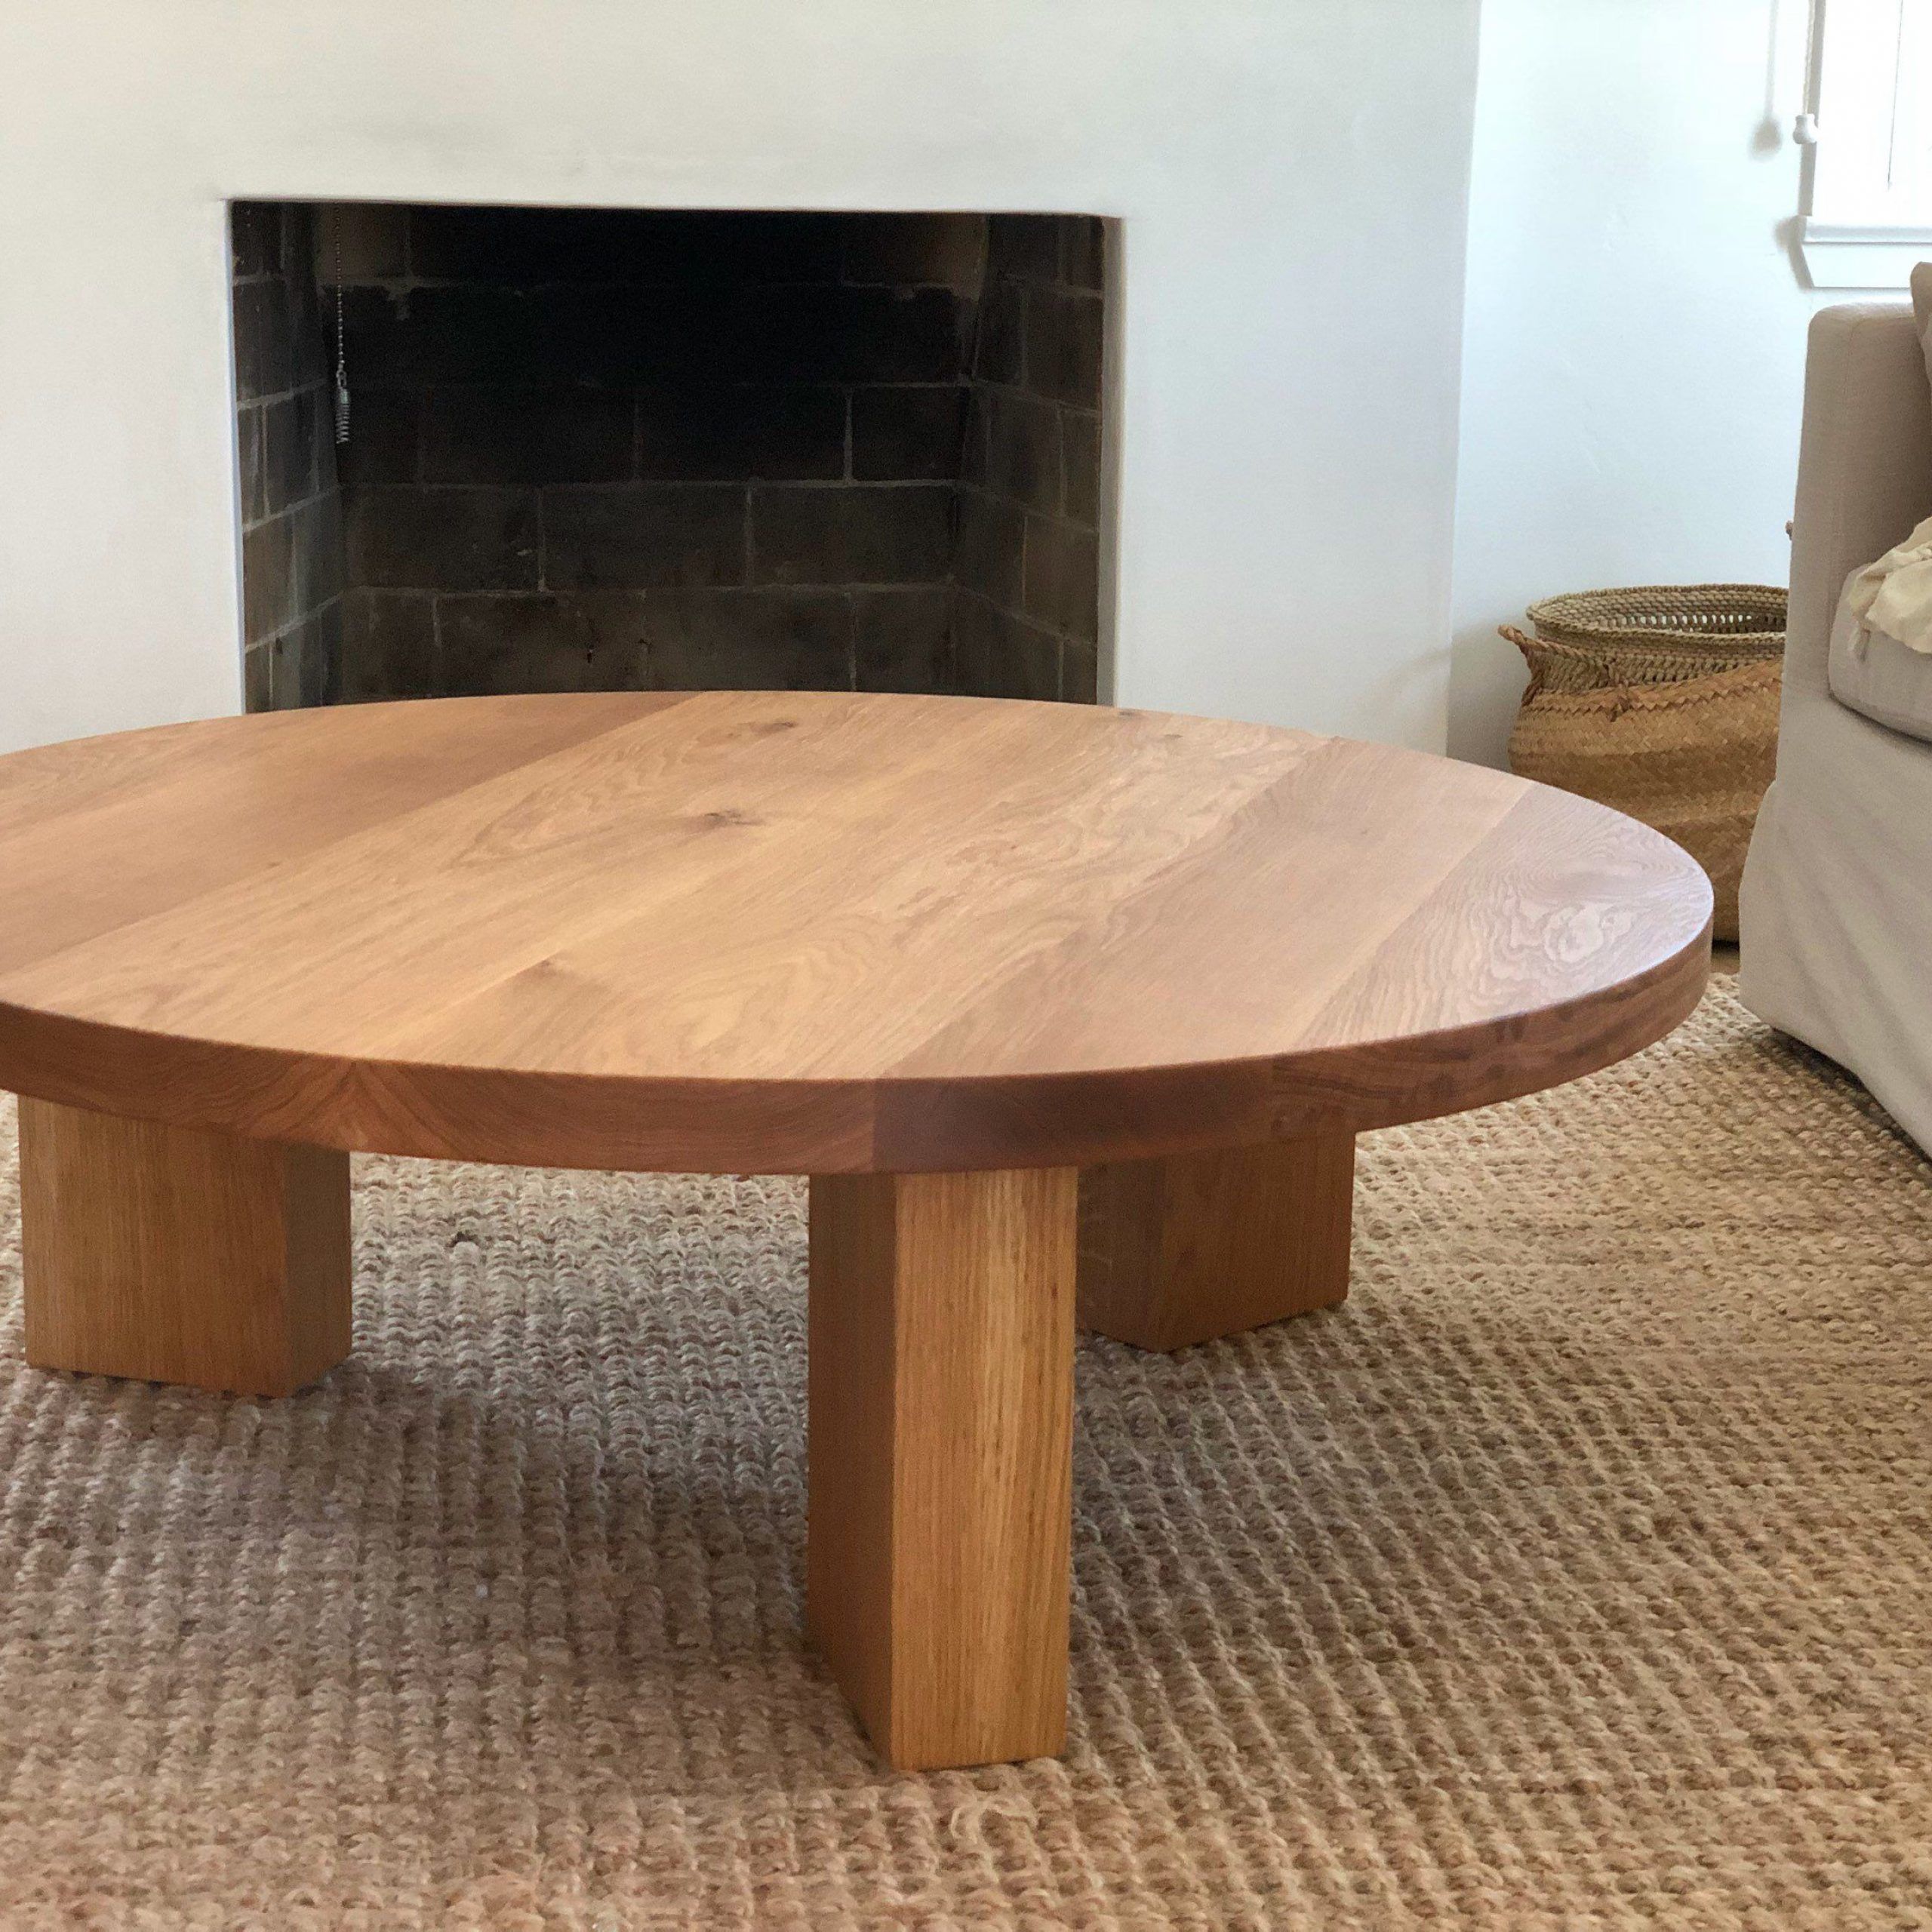 Etsy With Trendy Metal Legs And Oak Top Round Coffee Tables (Gallery 8 of 20)